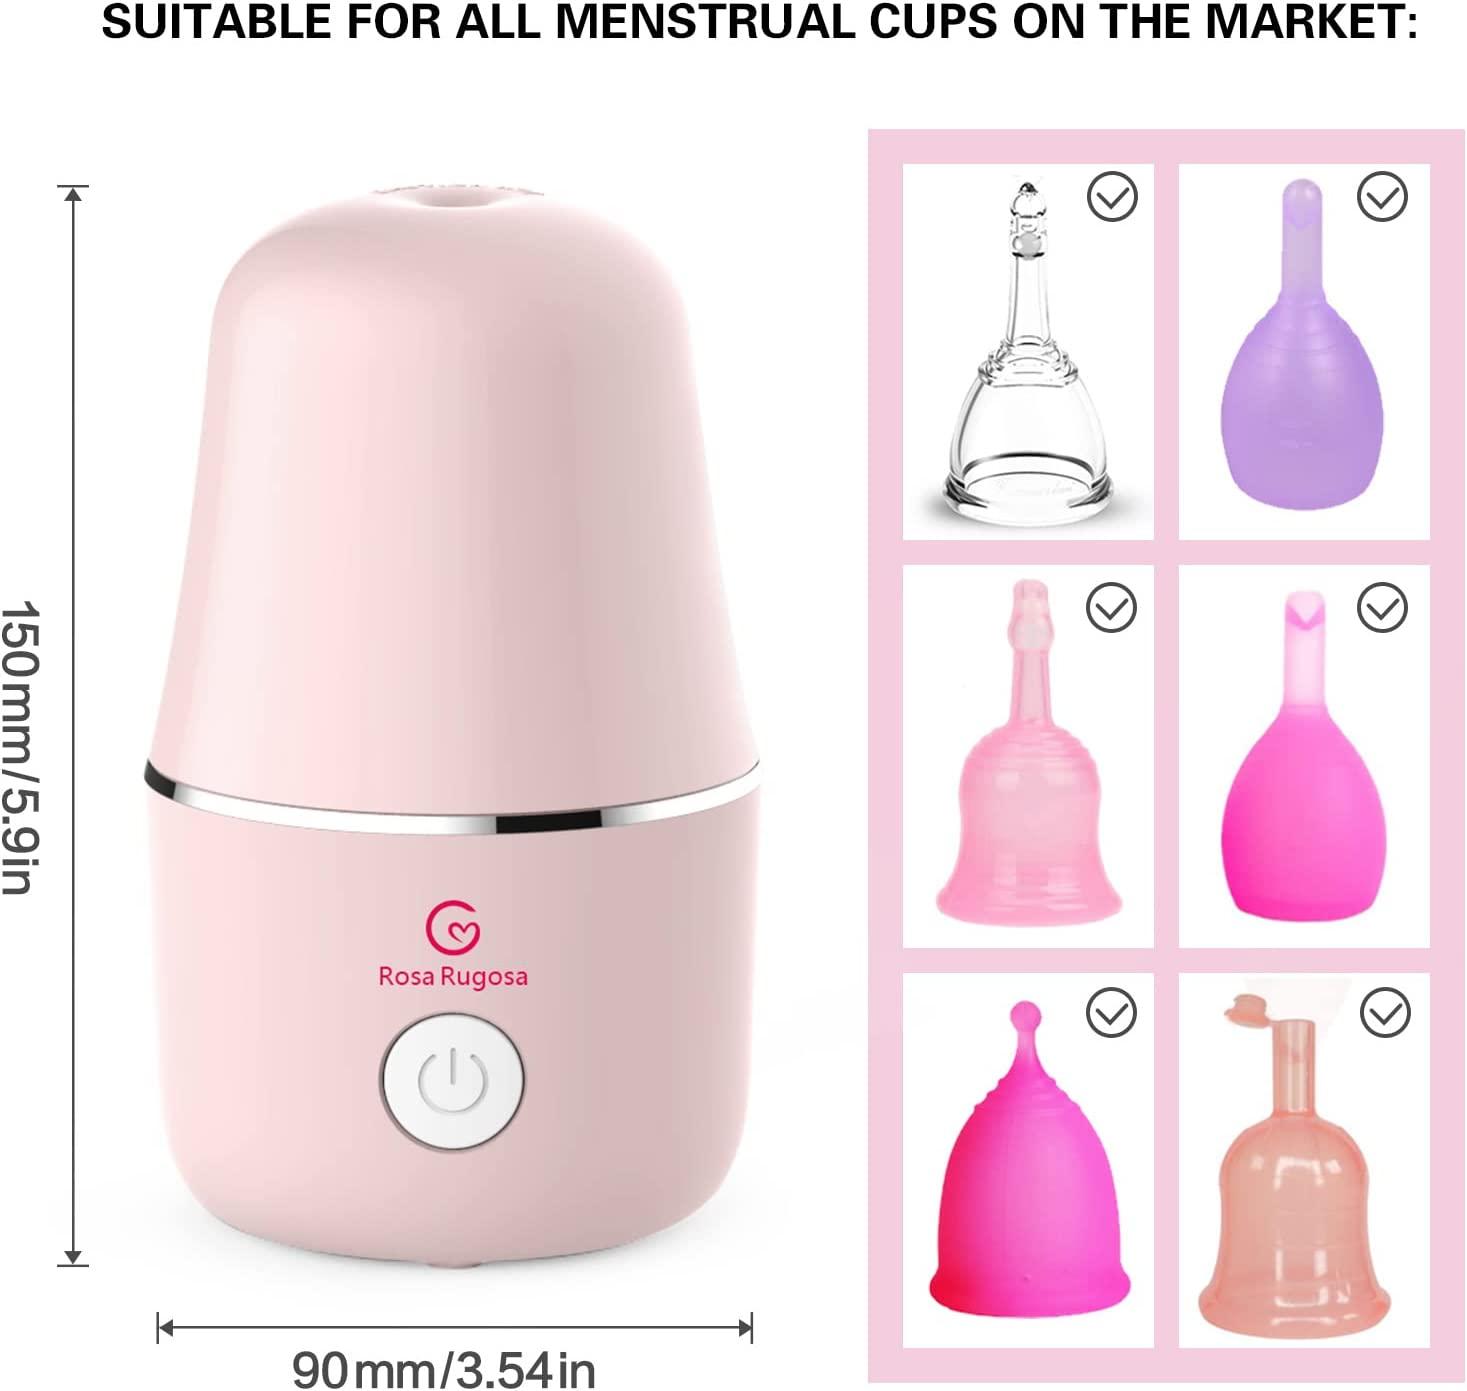 VOXAPOD Rosewater Pink On-The-Go Menstrual Cup Sterilizer, 1 ct